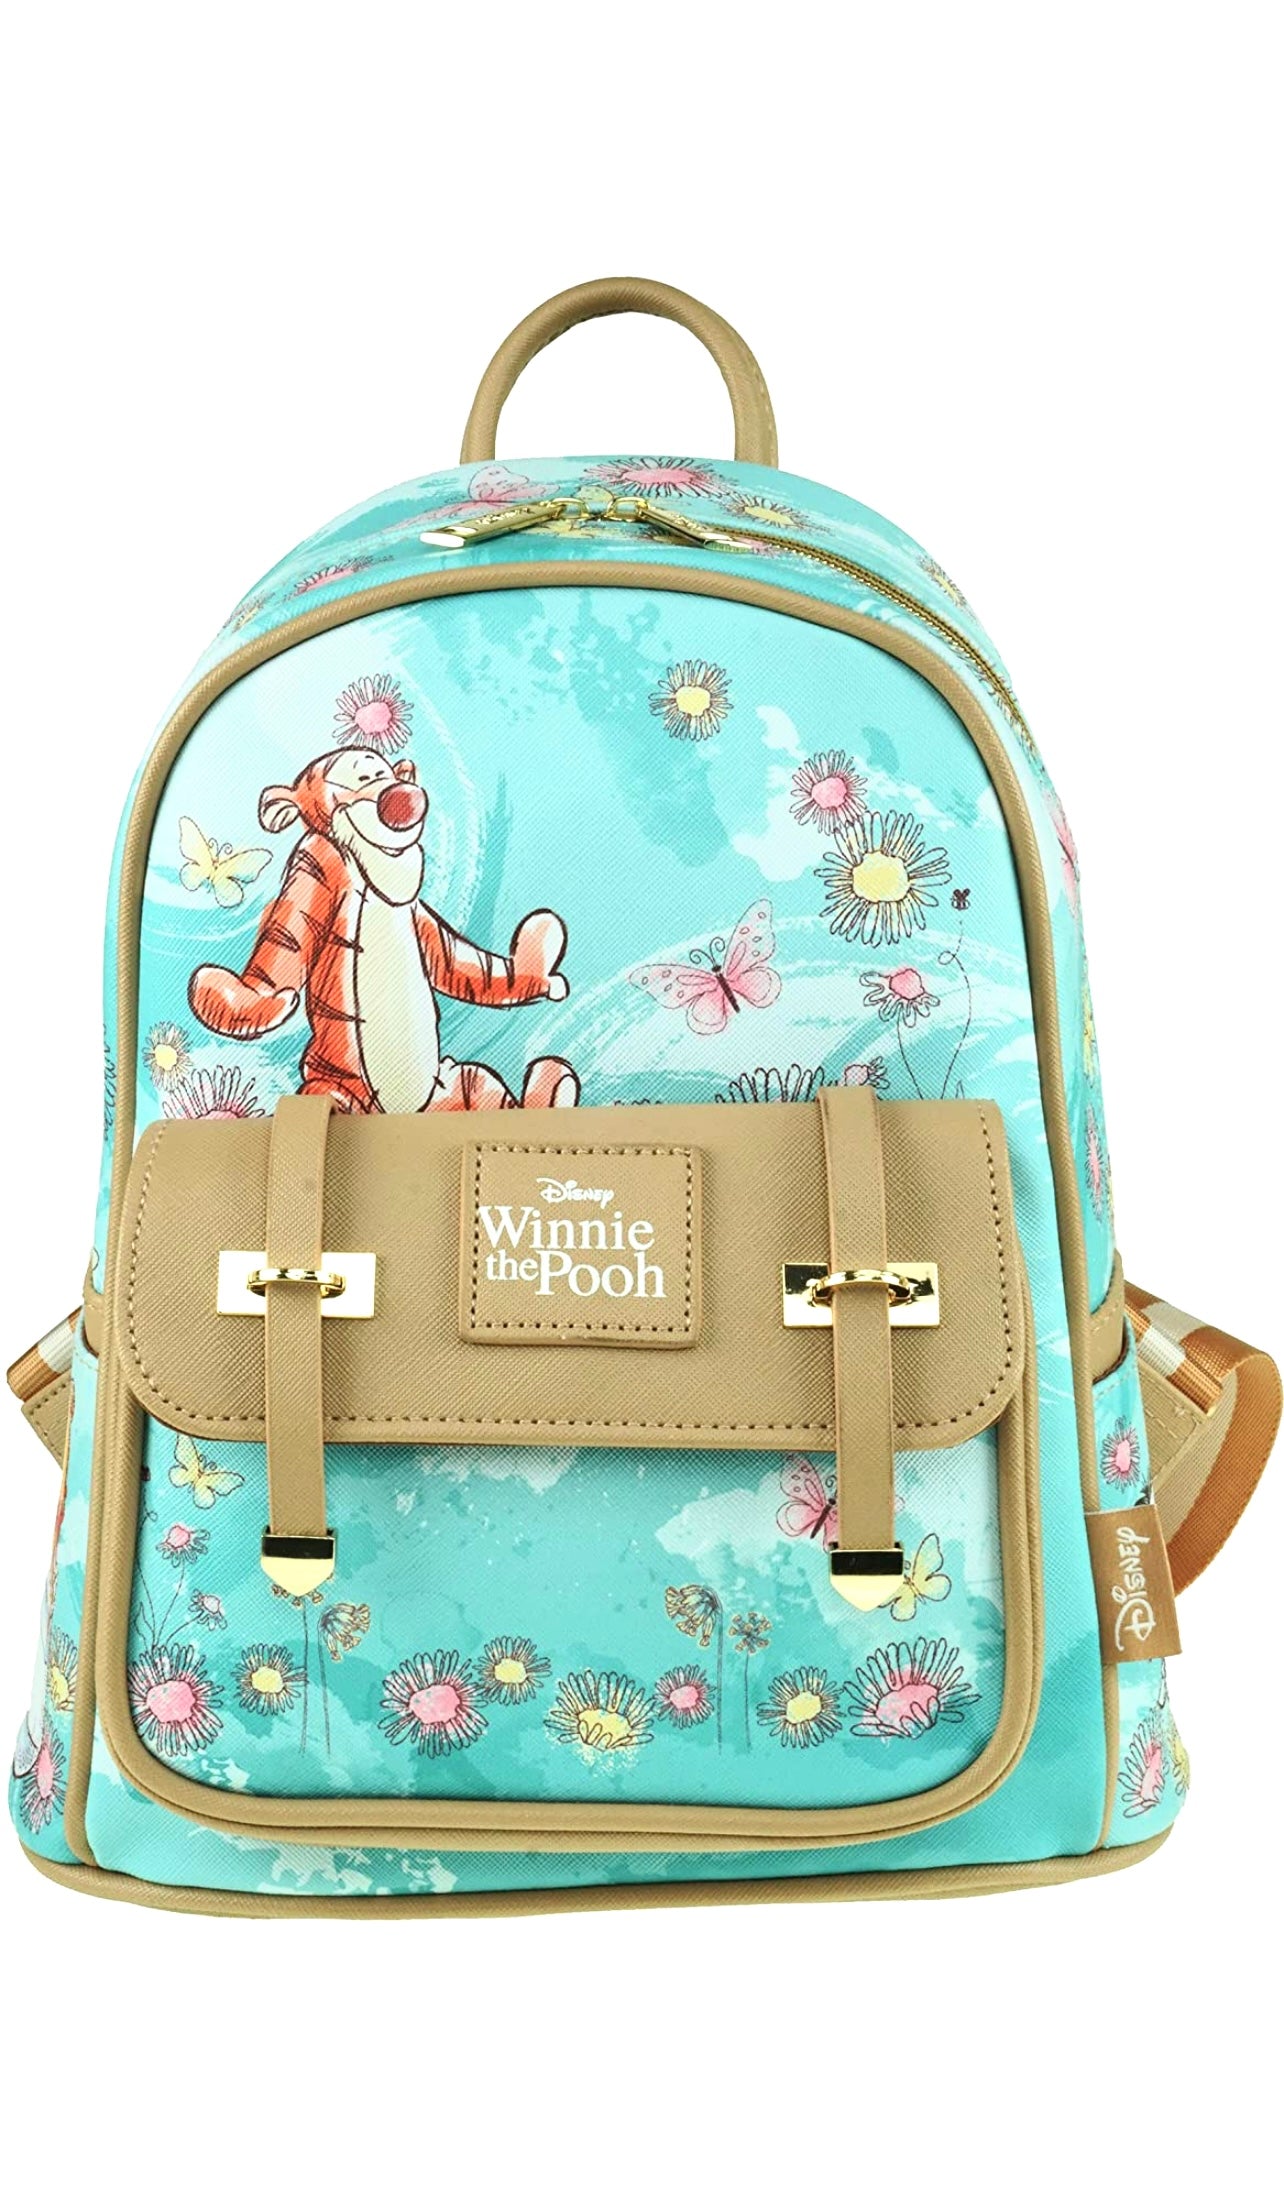 Winnie The Pooh Bear Rolling Backpack 16 inch Large Purple Flowers 003383, Adult Unisex, Size: 16 x 12 x 5